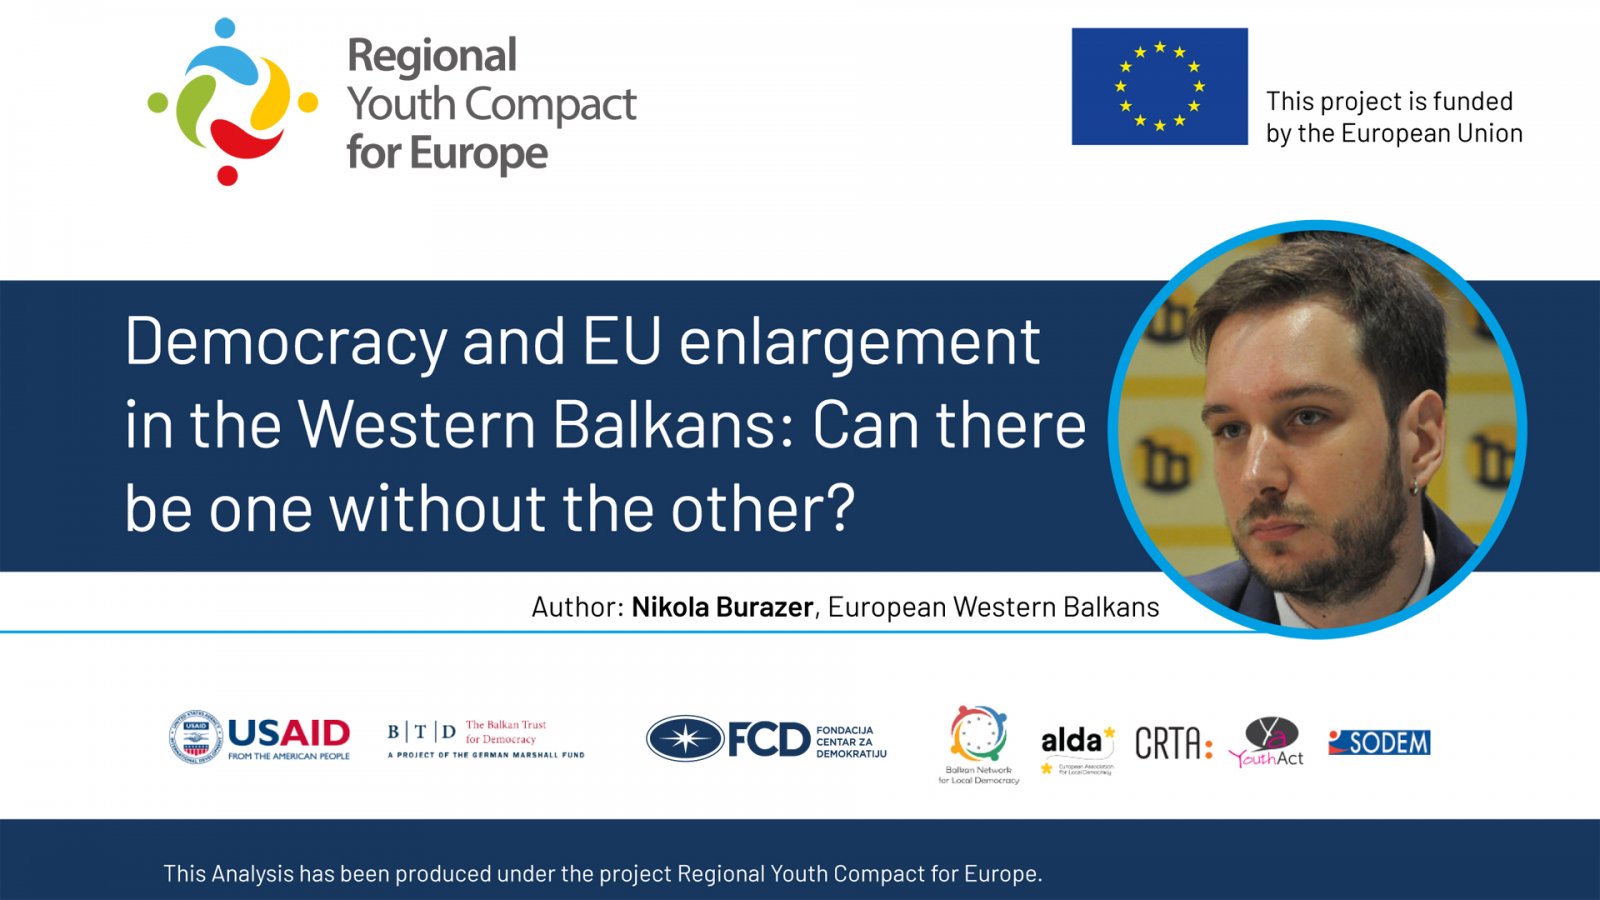 Democracy and EU enlargement in the Western Balkans: Can there be one without the other?